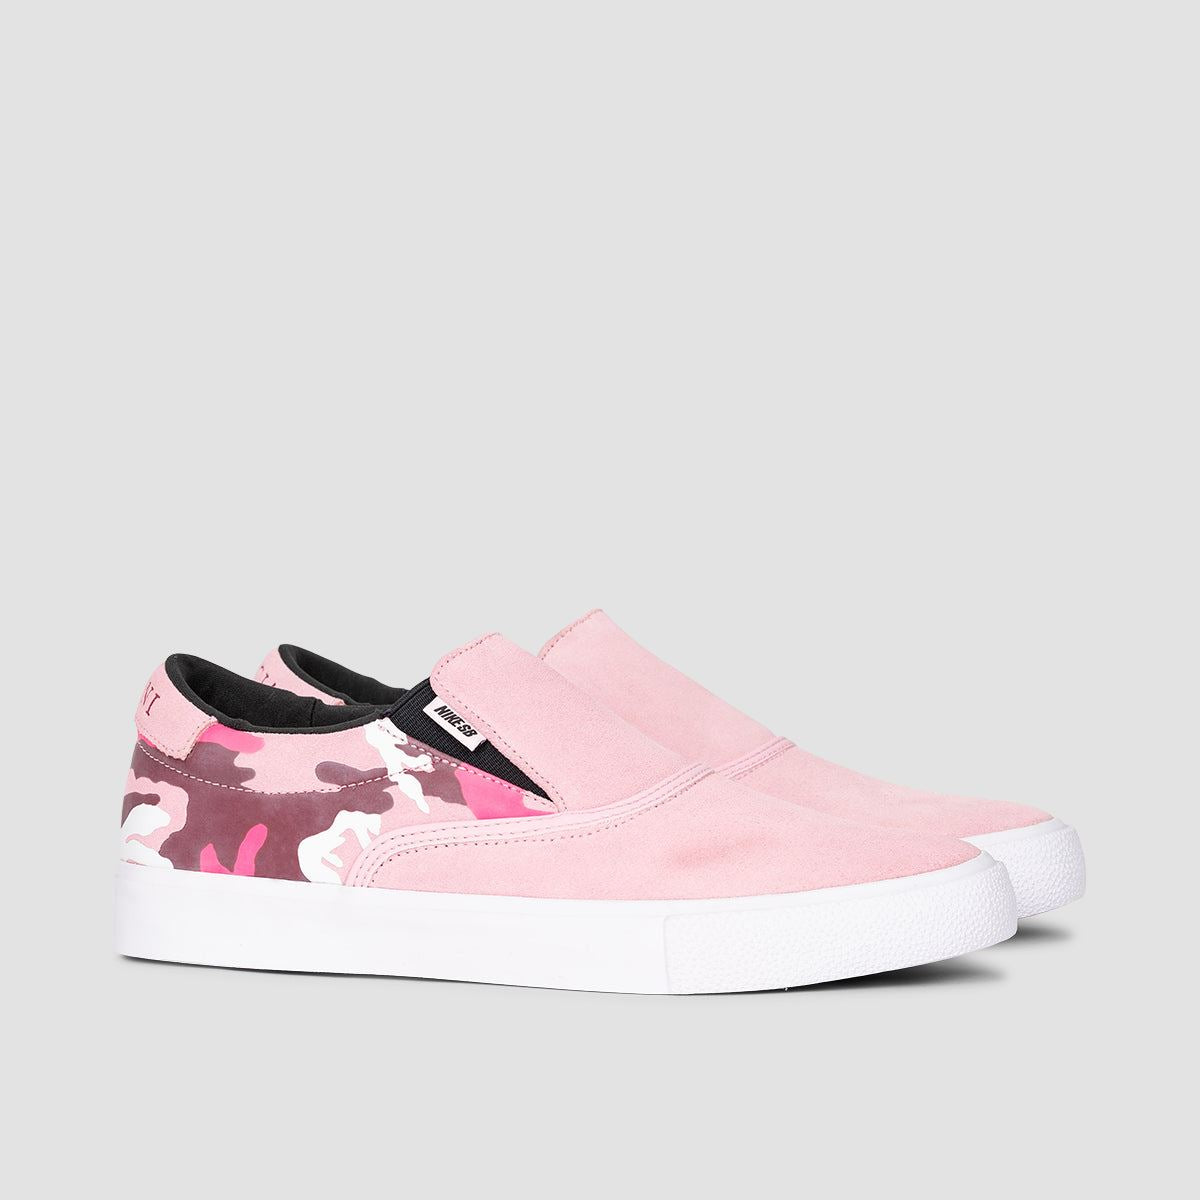 Nike SB Zoom Verona Slip x Leticia Bufoni Shoes - Prism Pink/Team Red/Pinksicle/White